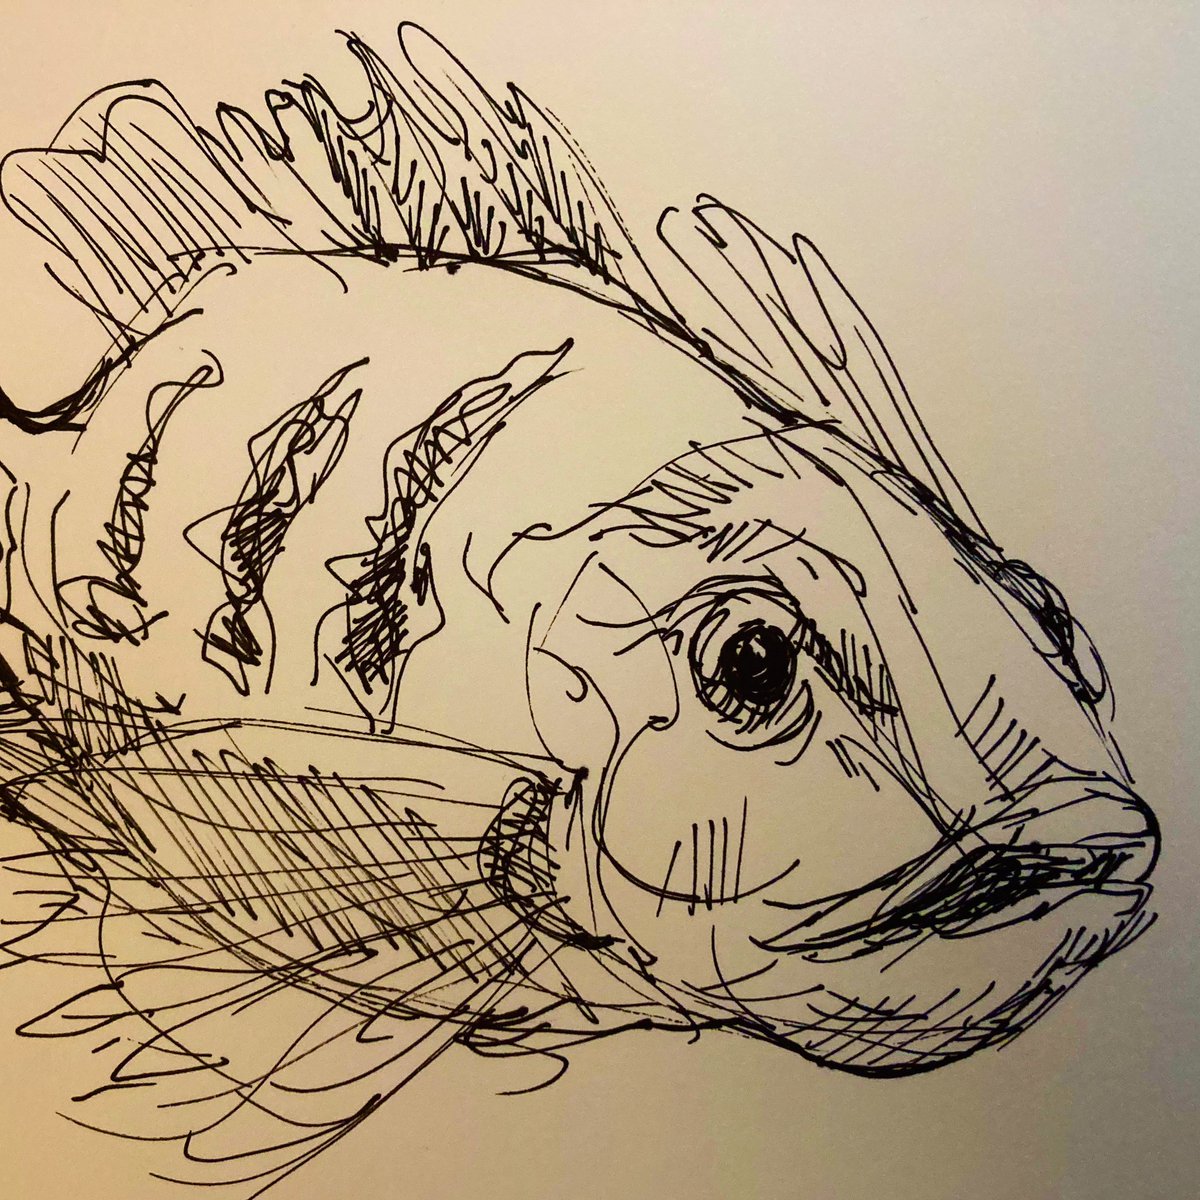 Goodmorning y’all!🐠#1stApril #fish #PenAndInk #pendrawing #drawing